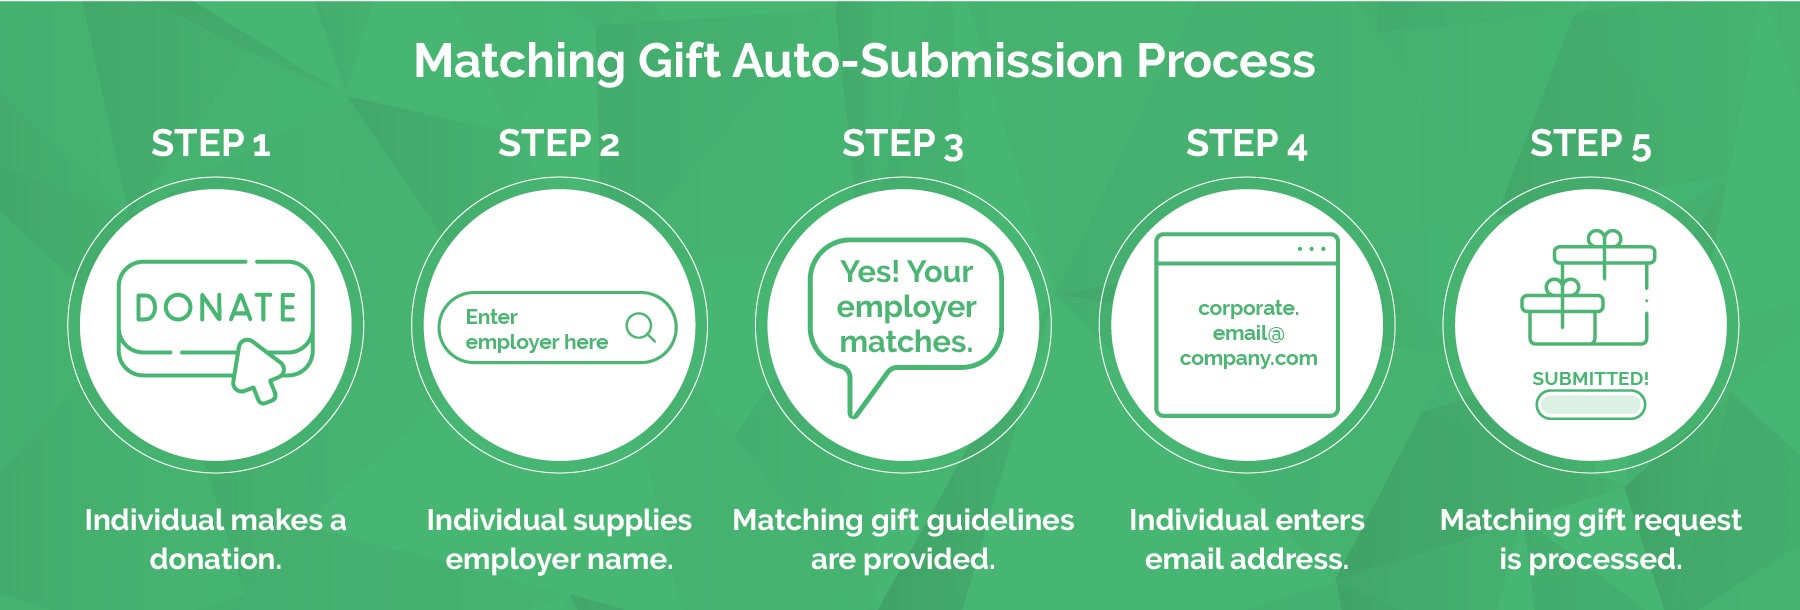 These five steps break down how the matching gift auto-submission process works.